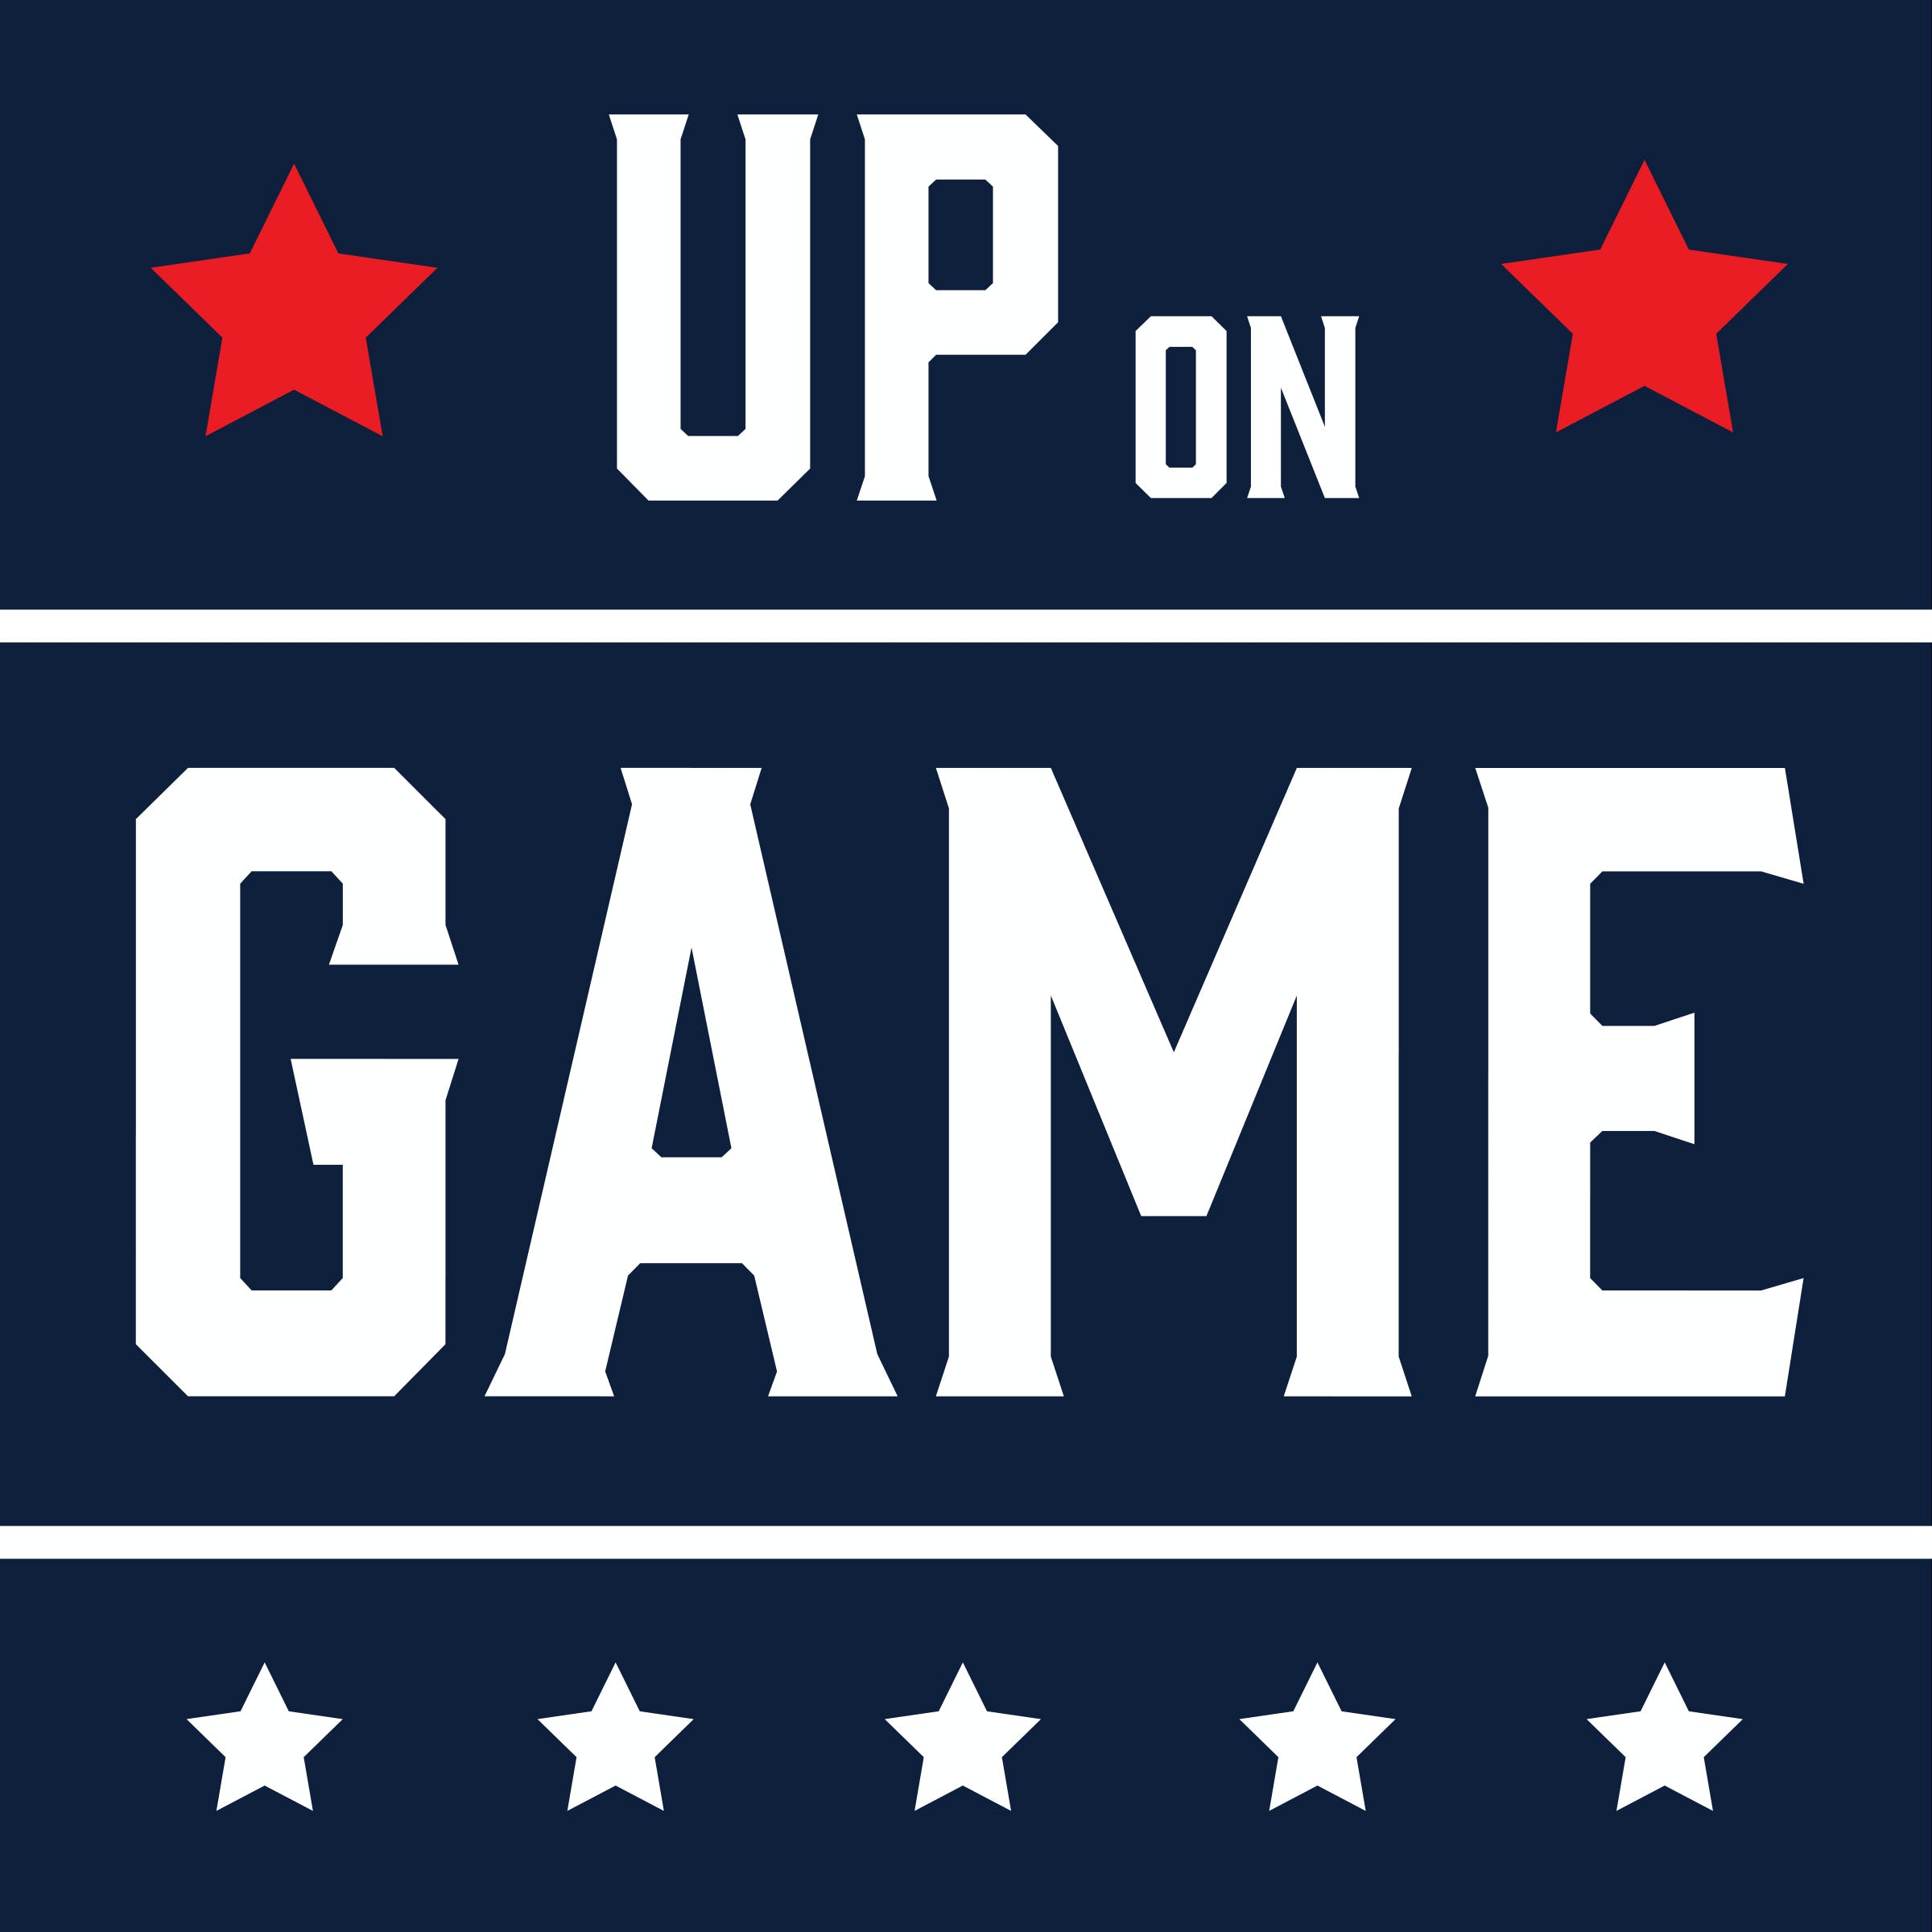 Up on Game: Hour 1 – College Football, Colorado & Deion Sanders, and more!